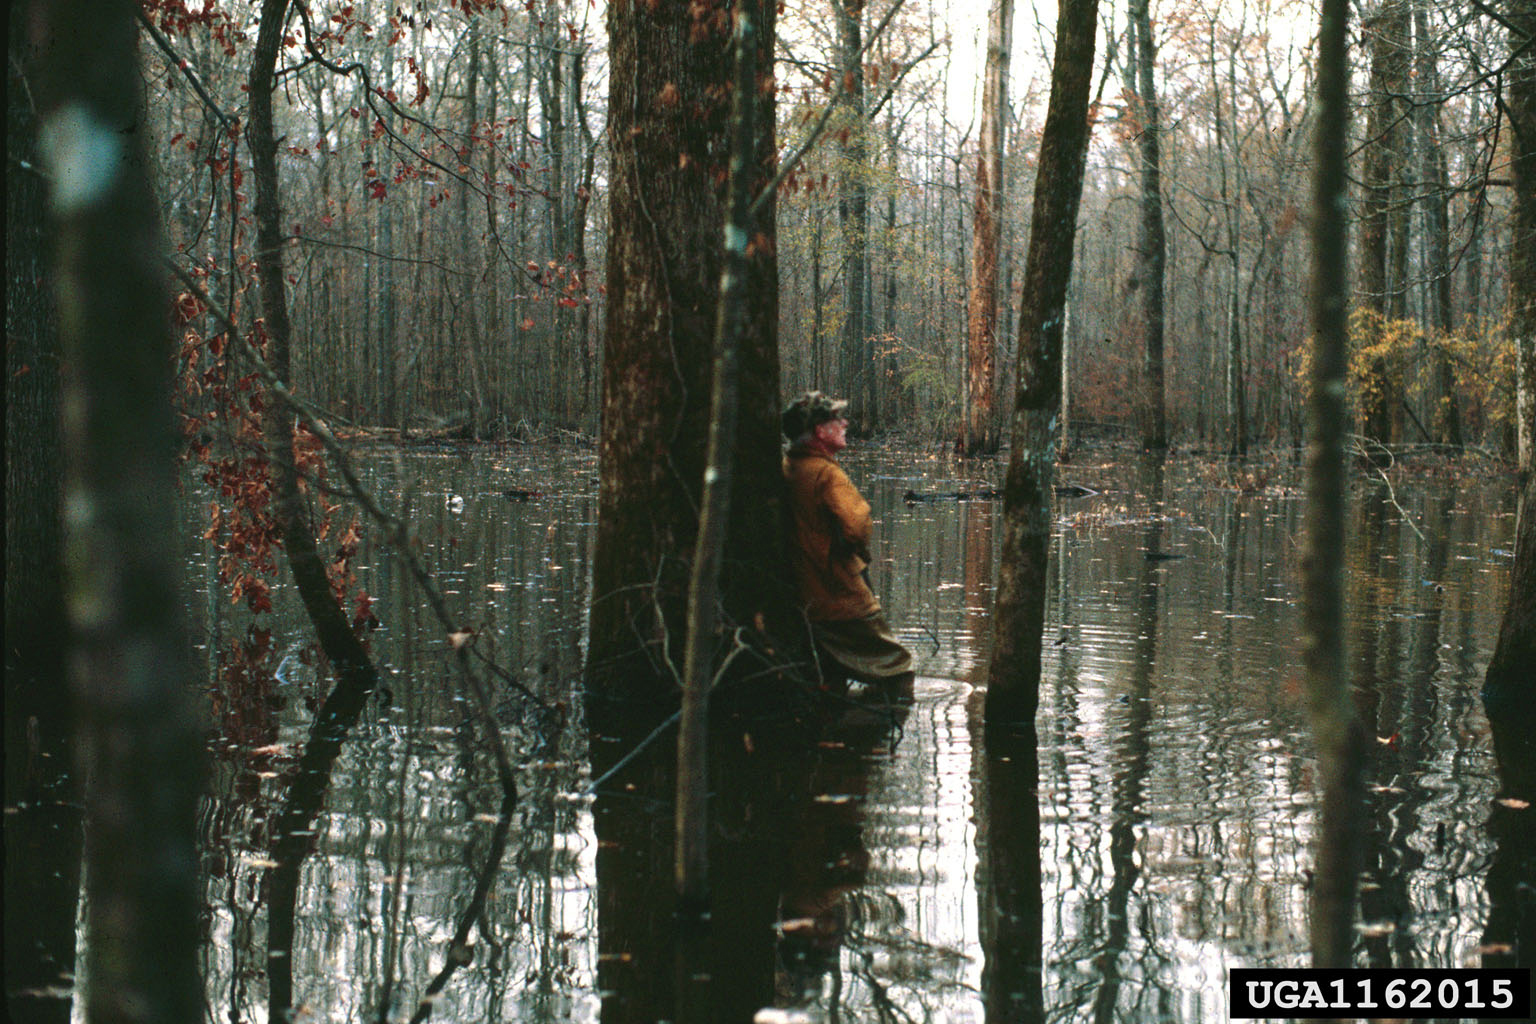 Photo of a man hunting leaned against a tree in knee deep swamp water.